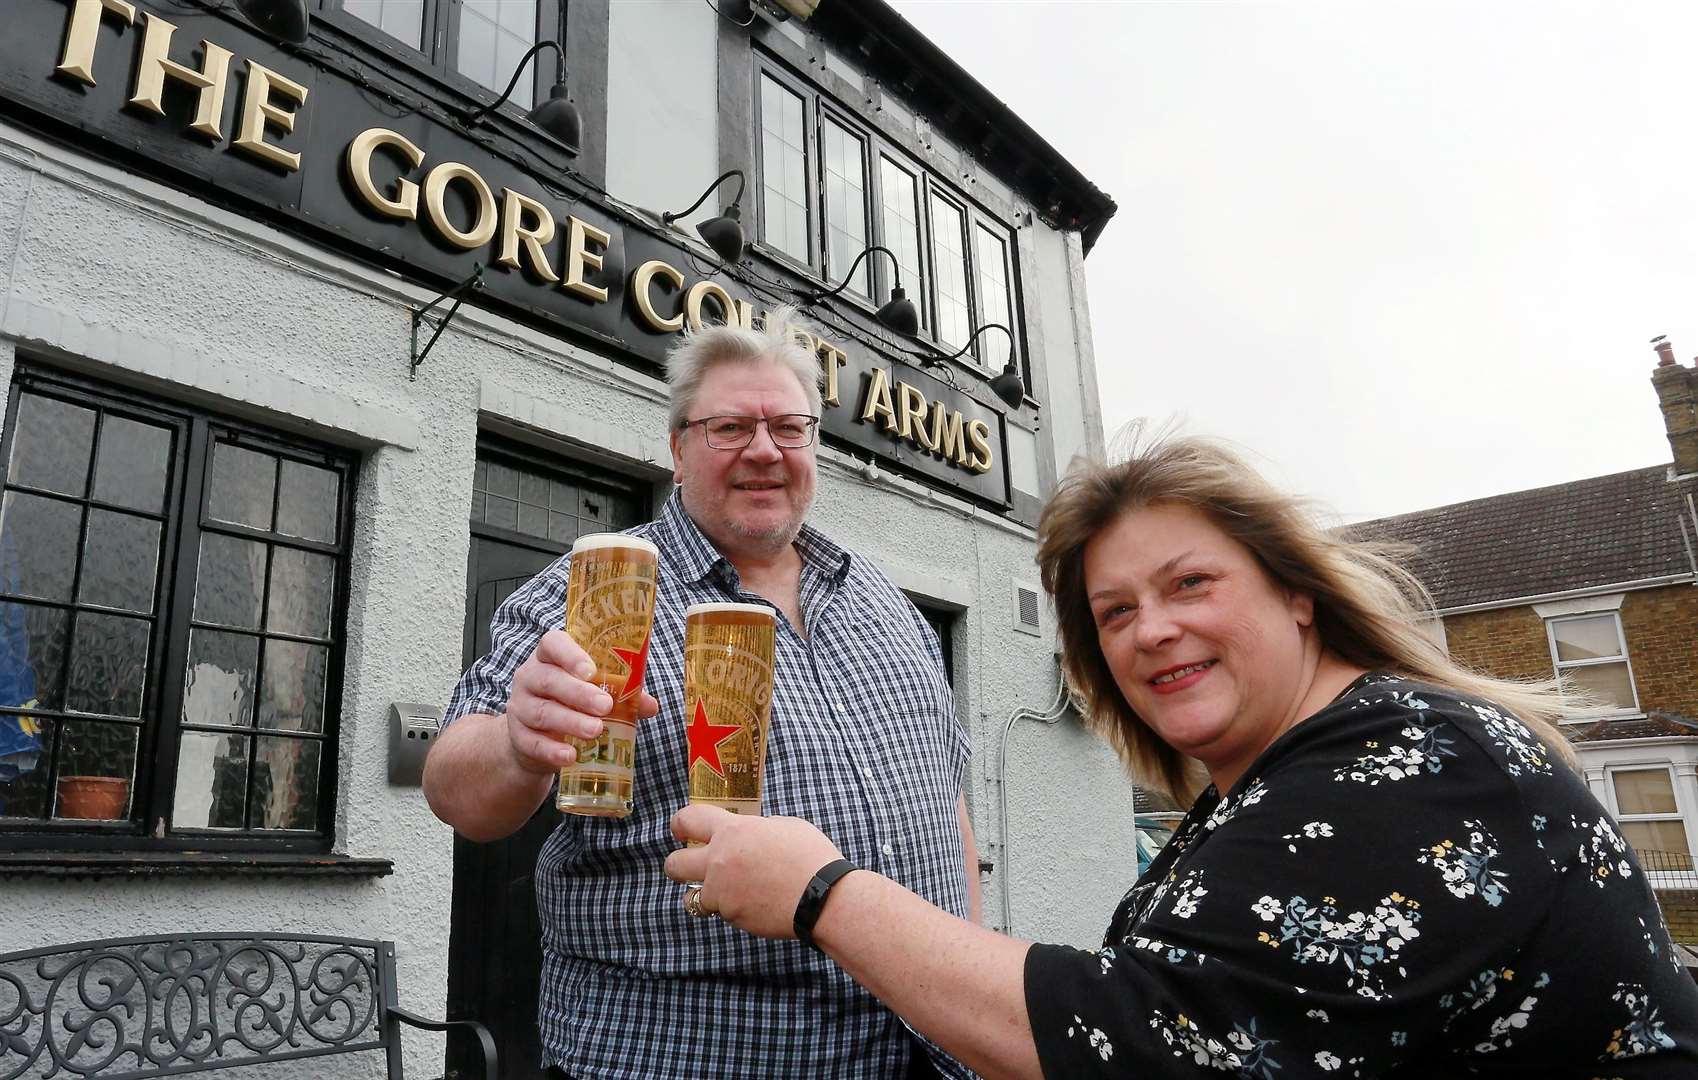 Delph and Dave Whitcombe have run The Gore Court Arms in Sittingbourne for 26 years